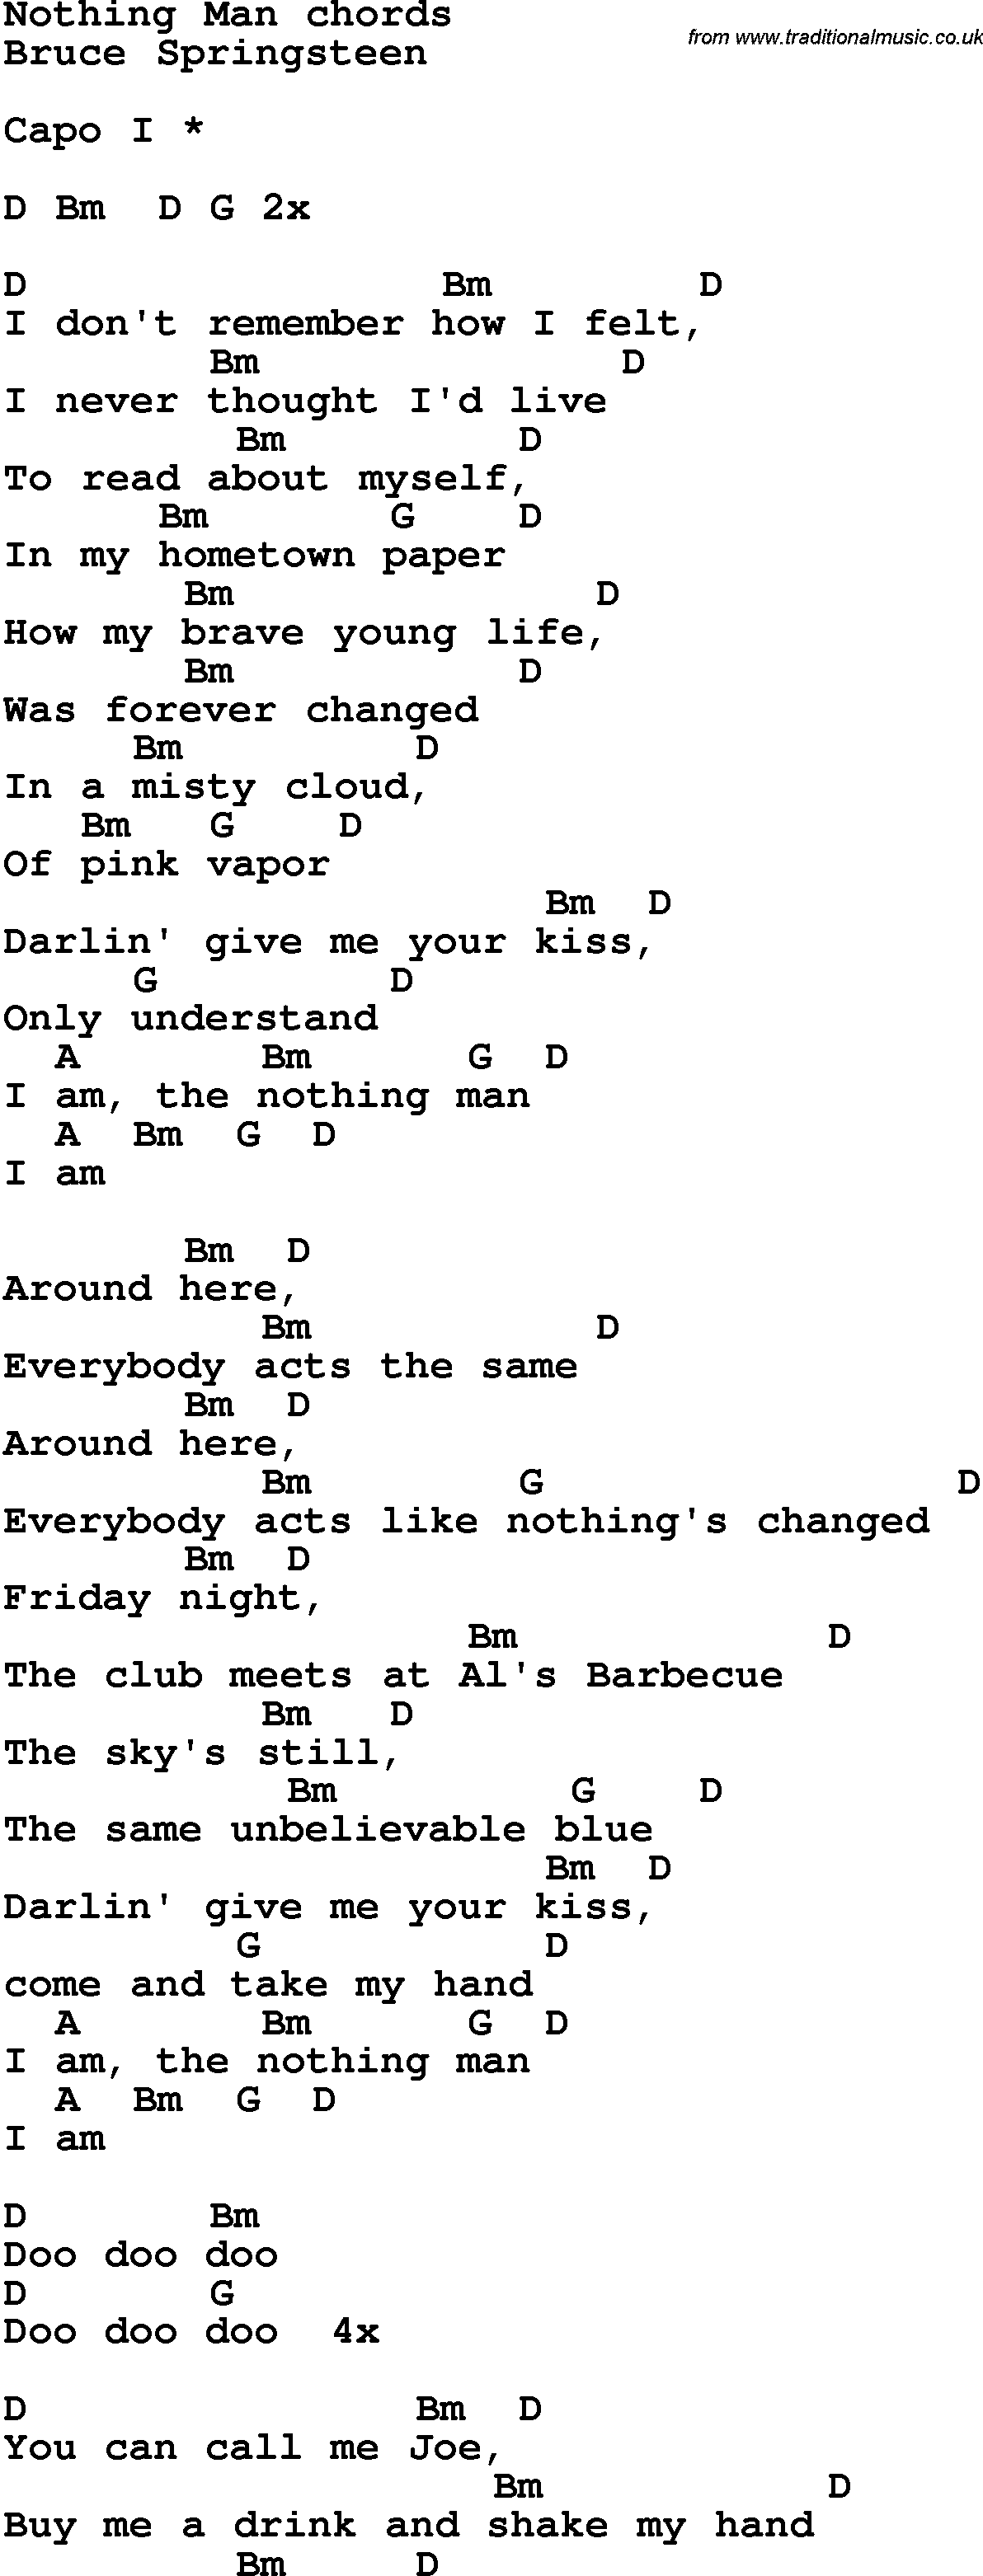 Song Lyrics with guitar chords for Nothing Man